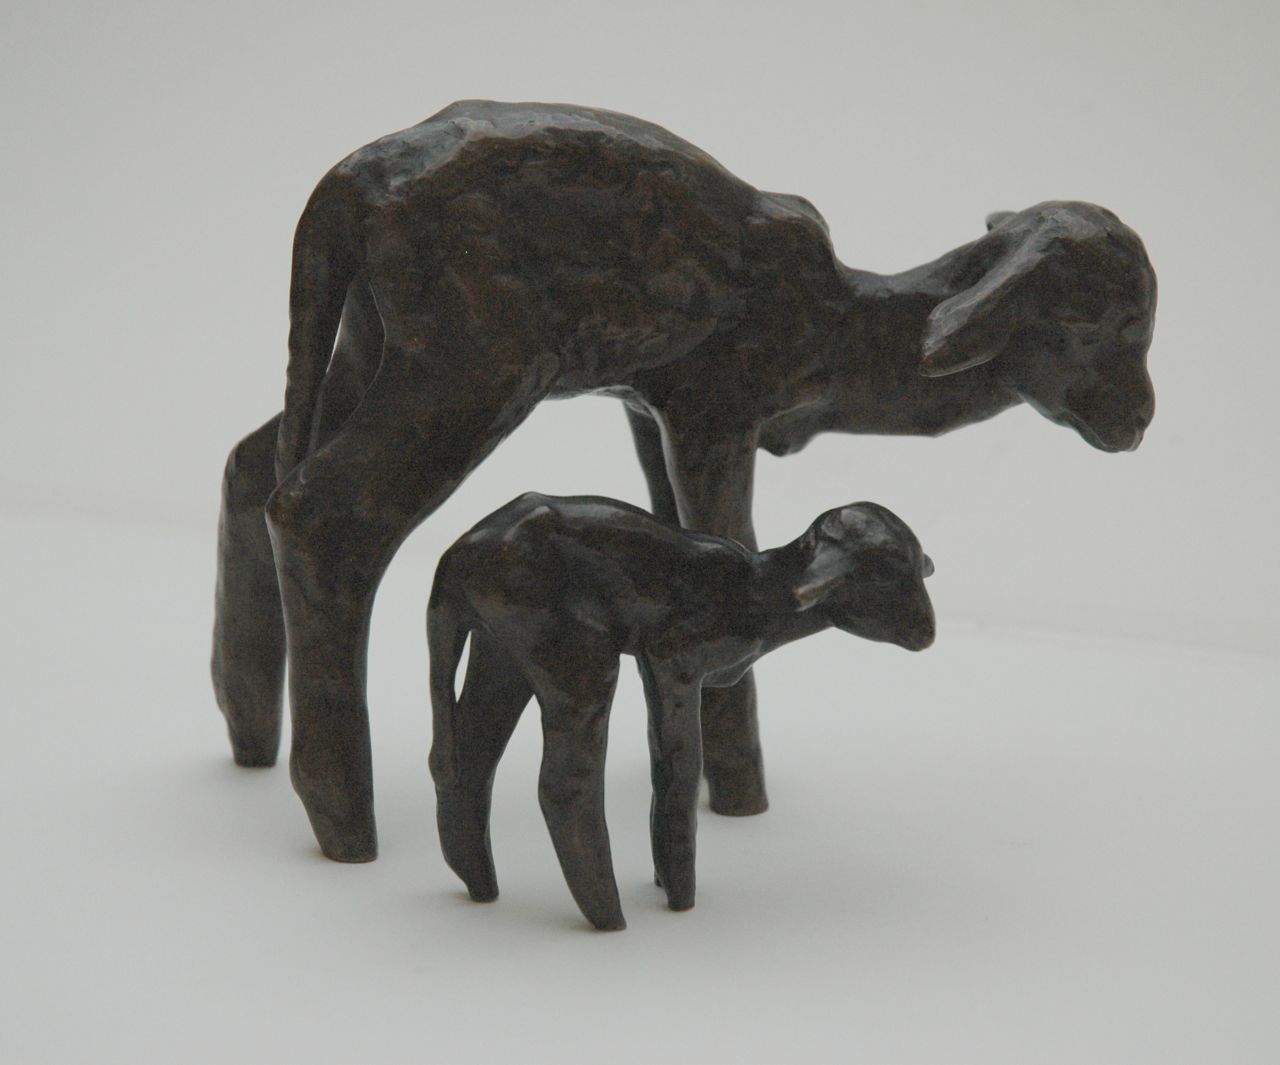 Baisch E.  | Ernst Baisch, Two lambs, patinated bronze 12.0 x 15.0 cm, signed with initials beneath the frontlegs